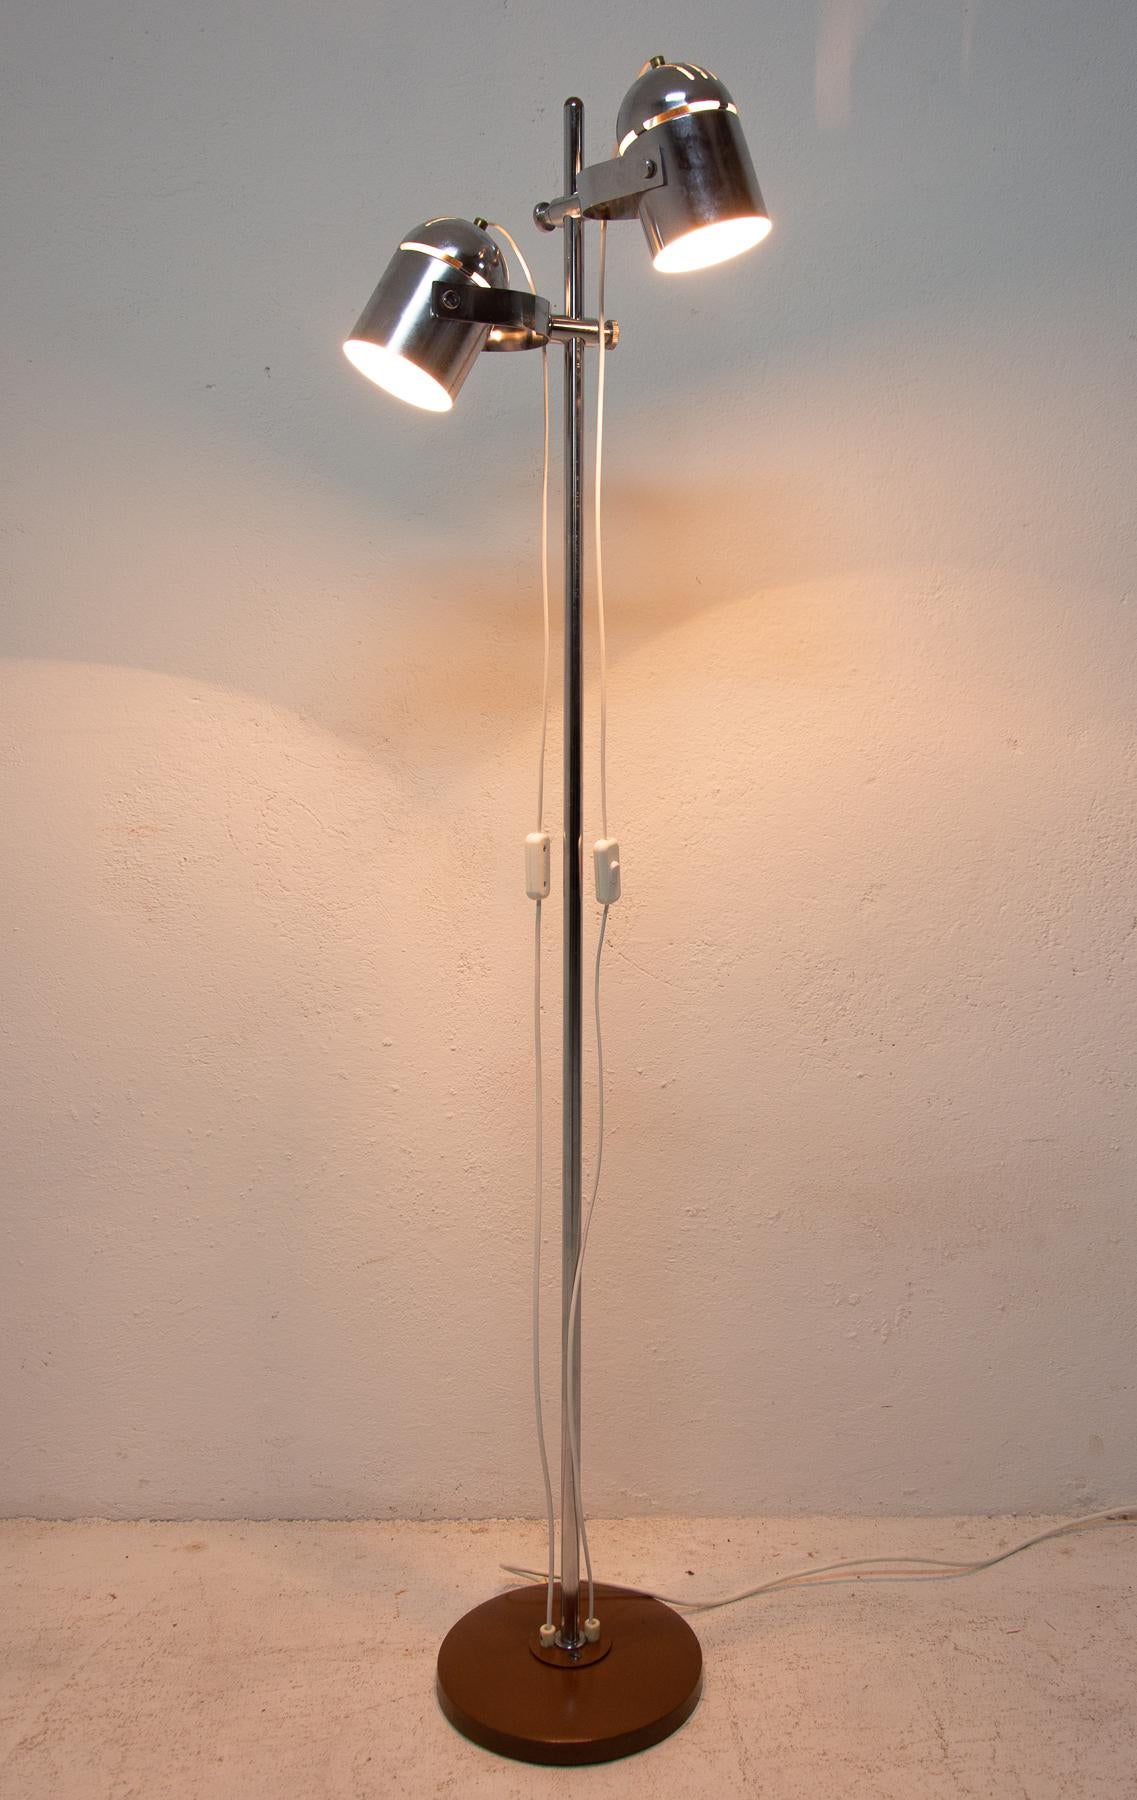 Elegant silver floor lamp or spotlight from the 1970s, it was designed by Stanislav Indra-famous Czechoslovak designer. Great fitting, that allows the lamp heads to adjust up and down along the post. Turned aluminum tapered bell-shaped shade. The